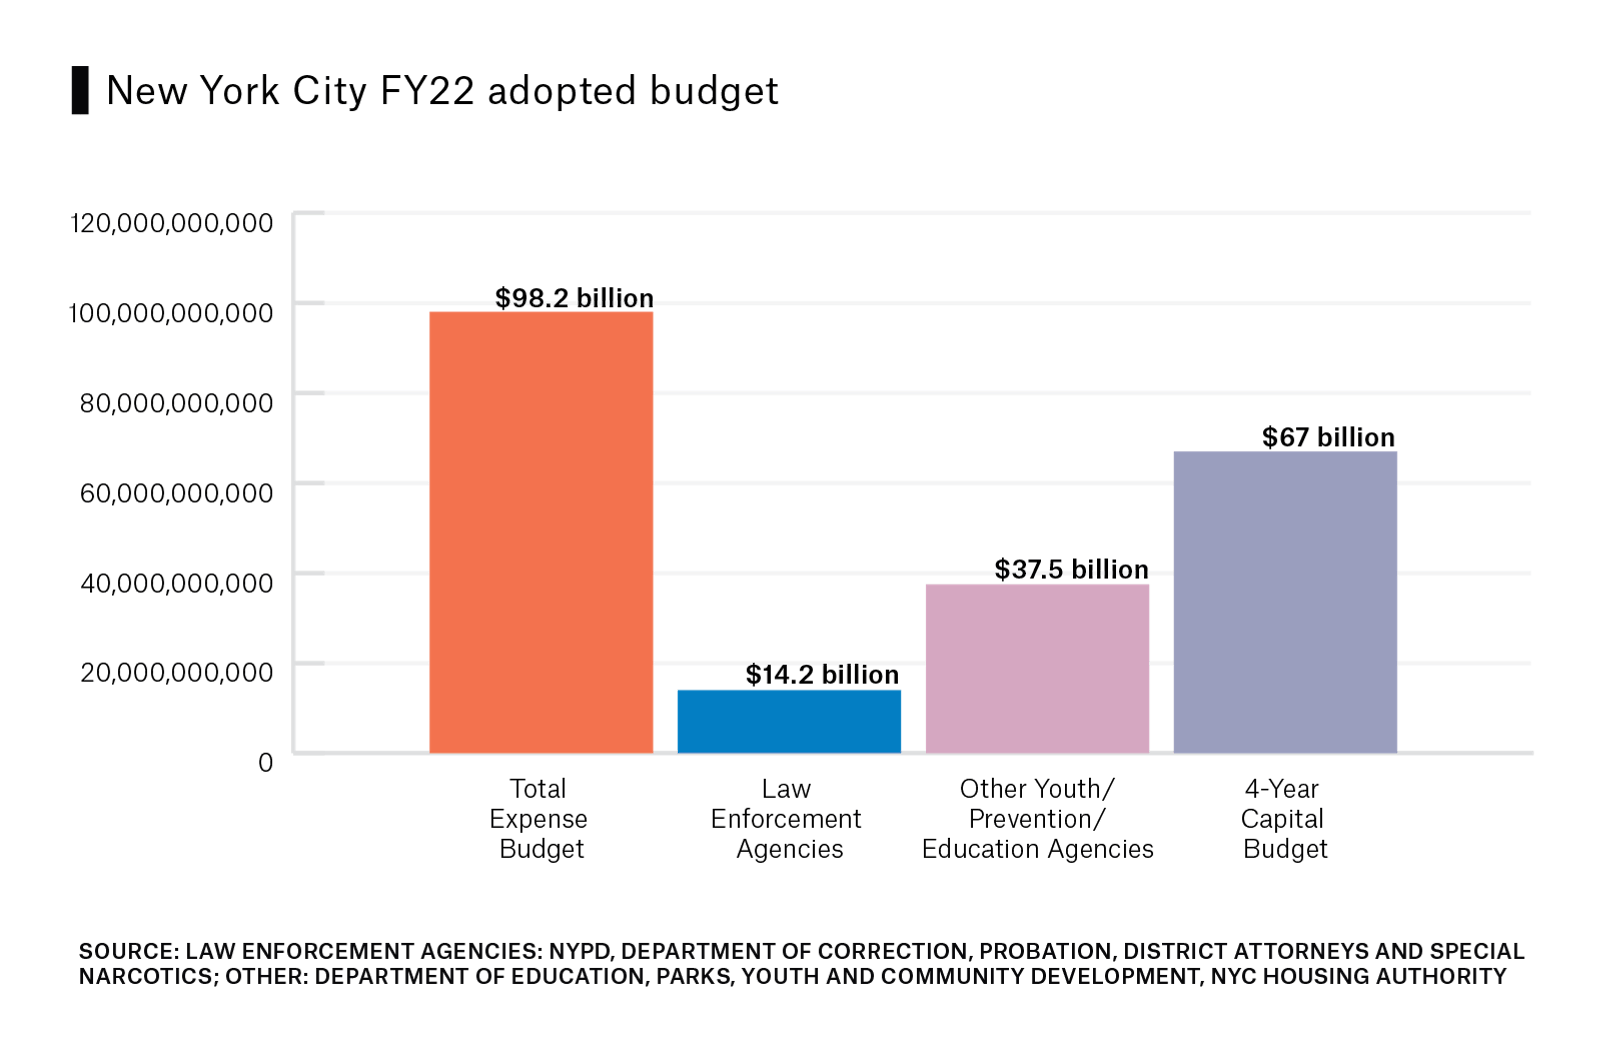 Bar chart shows the N, Y, C Fiscal Year 2022 adopted budget in billions. Total Expense Budget is the highest at 98.2, followed by 4-Year Capital budget at 67, Other Youth/Prevention/Education Agencies at 37.5, and Law Enforcement Agencies at 14.2.